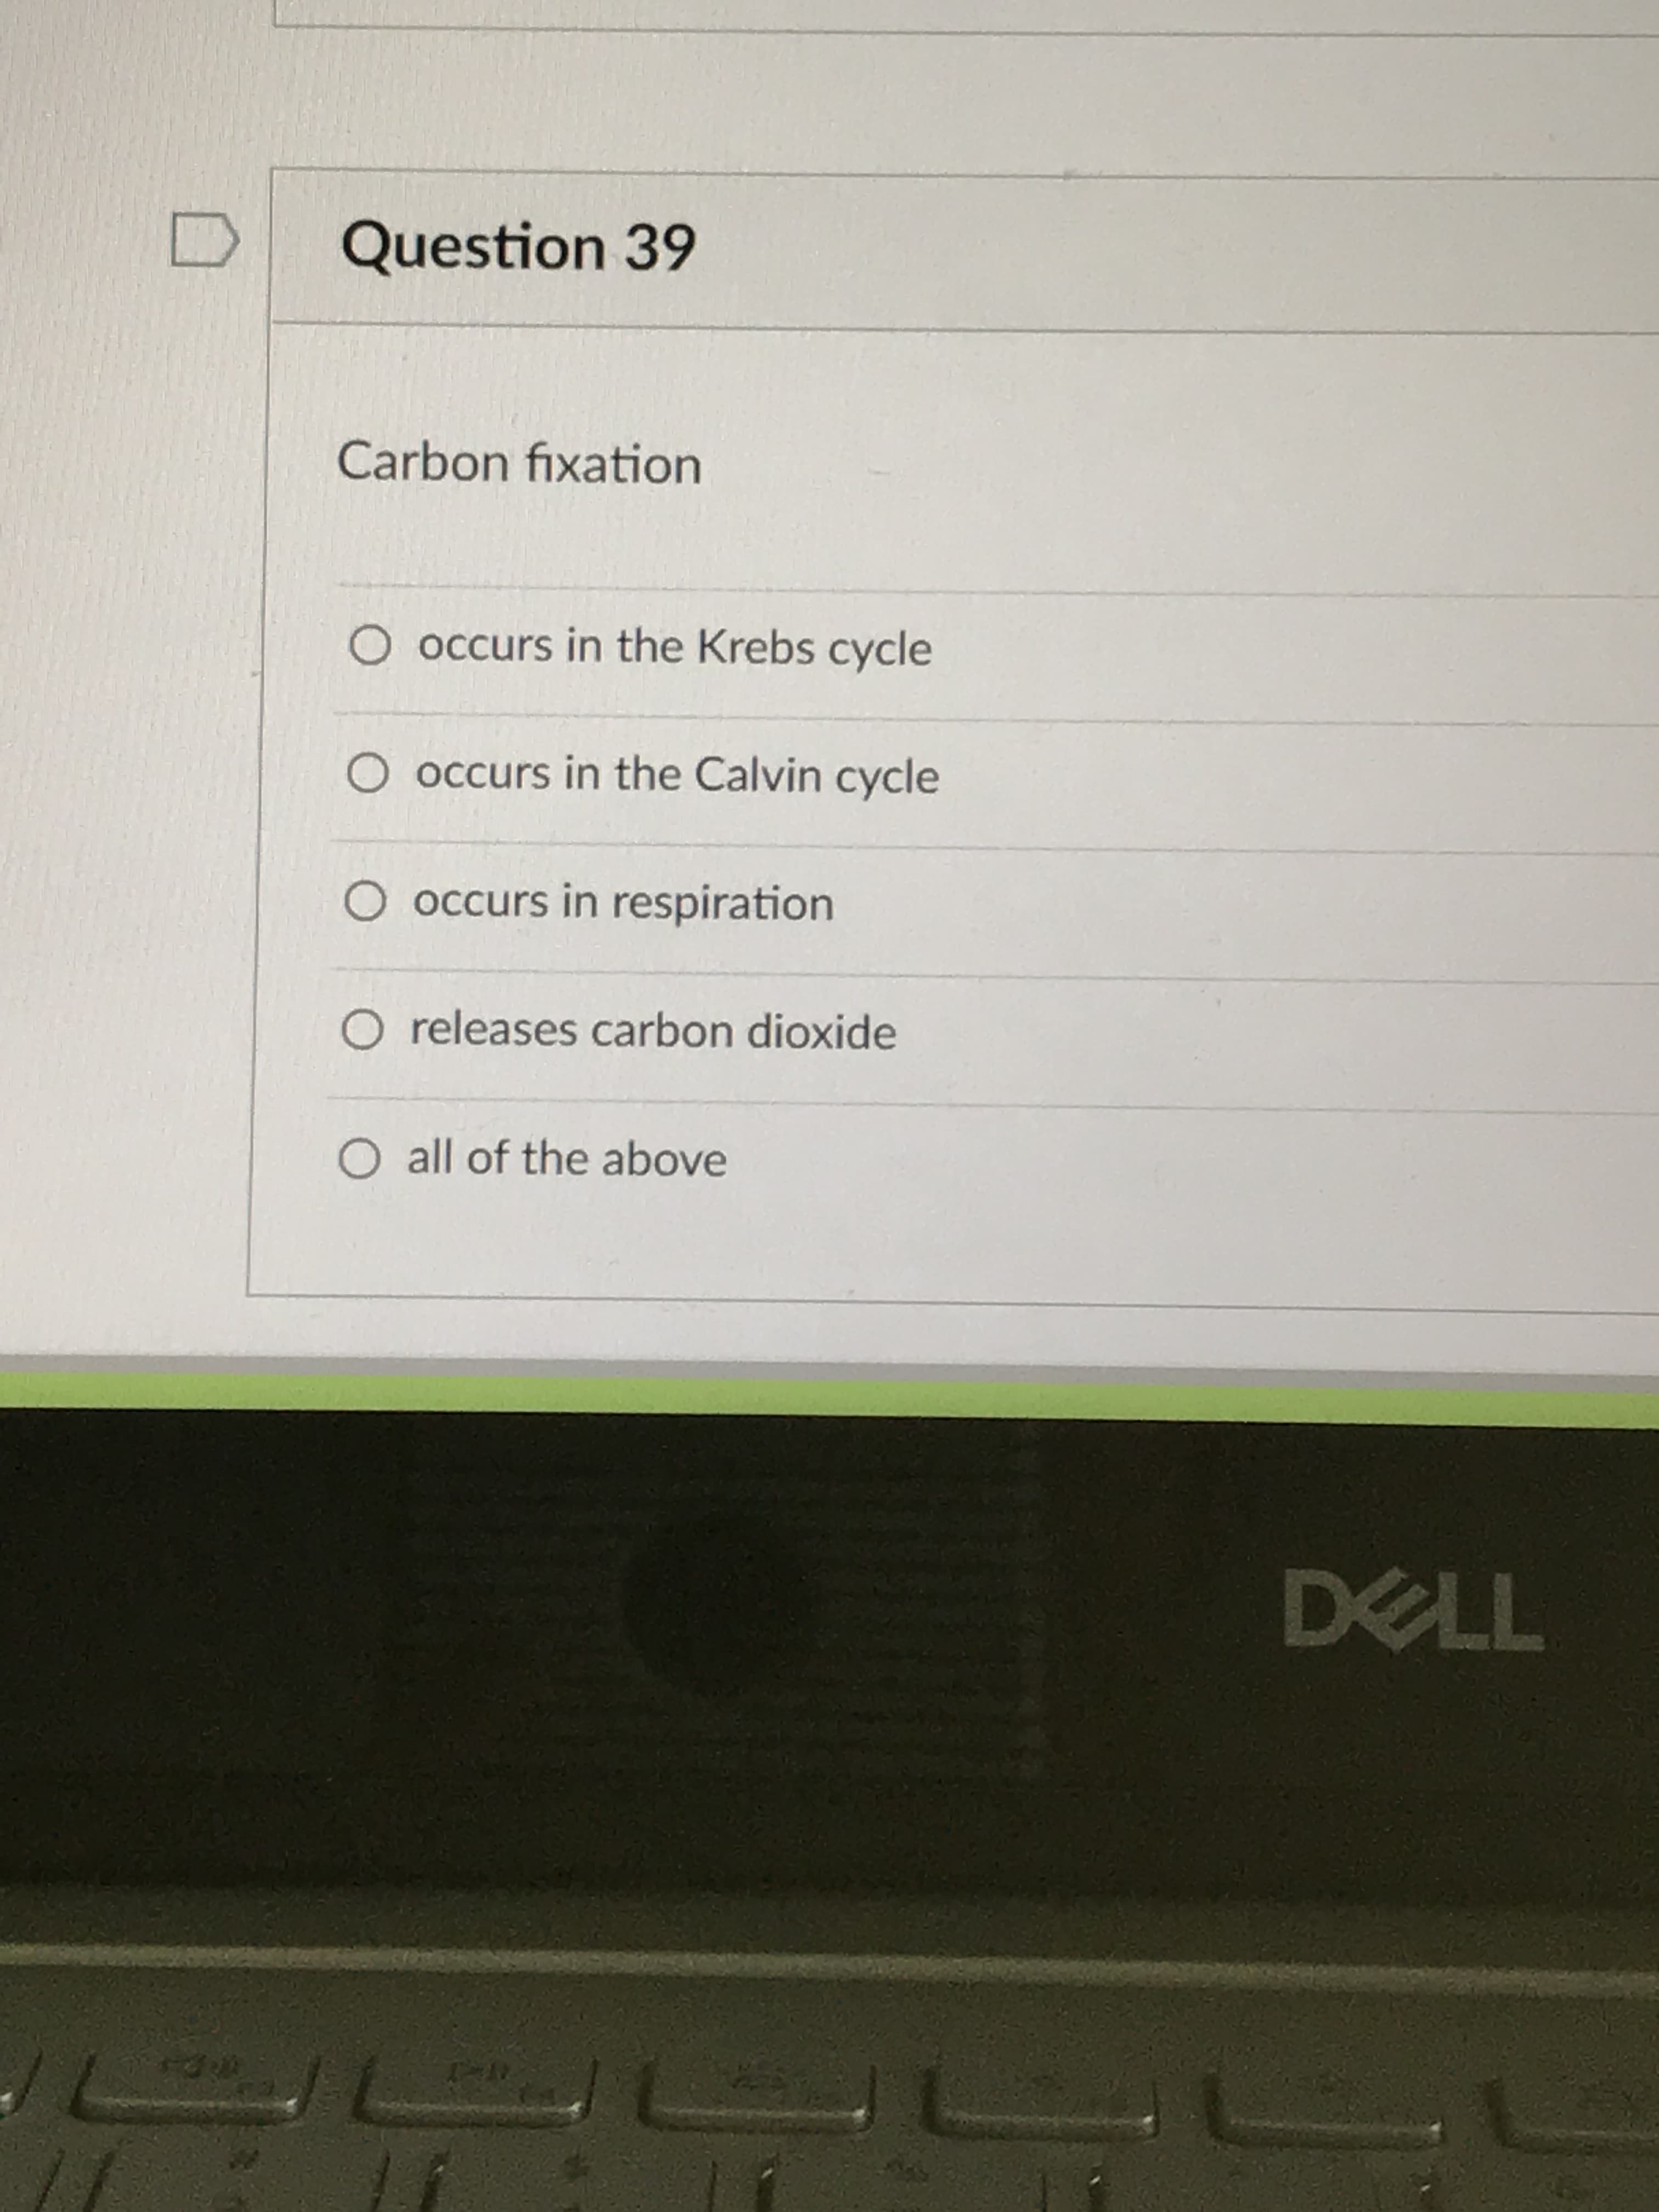 Question 39
Carbon fixation
O occurs in the Krebs cycle
O occurs in the Calvin cycle
O occurs in respiration
O releases carbon dioxide
O all of the above
